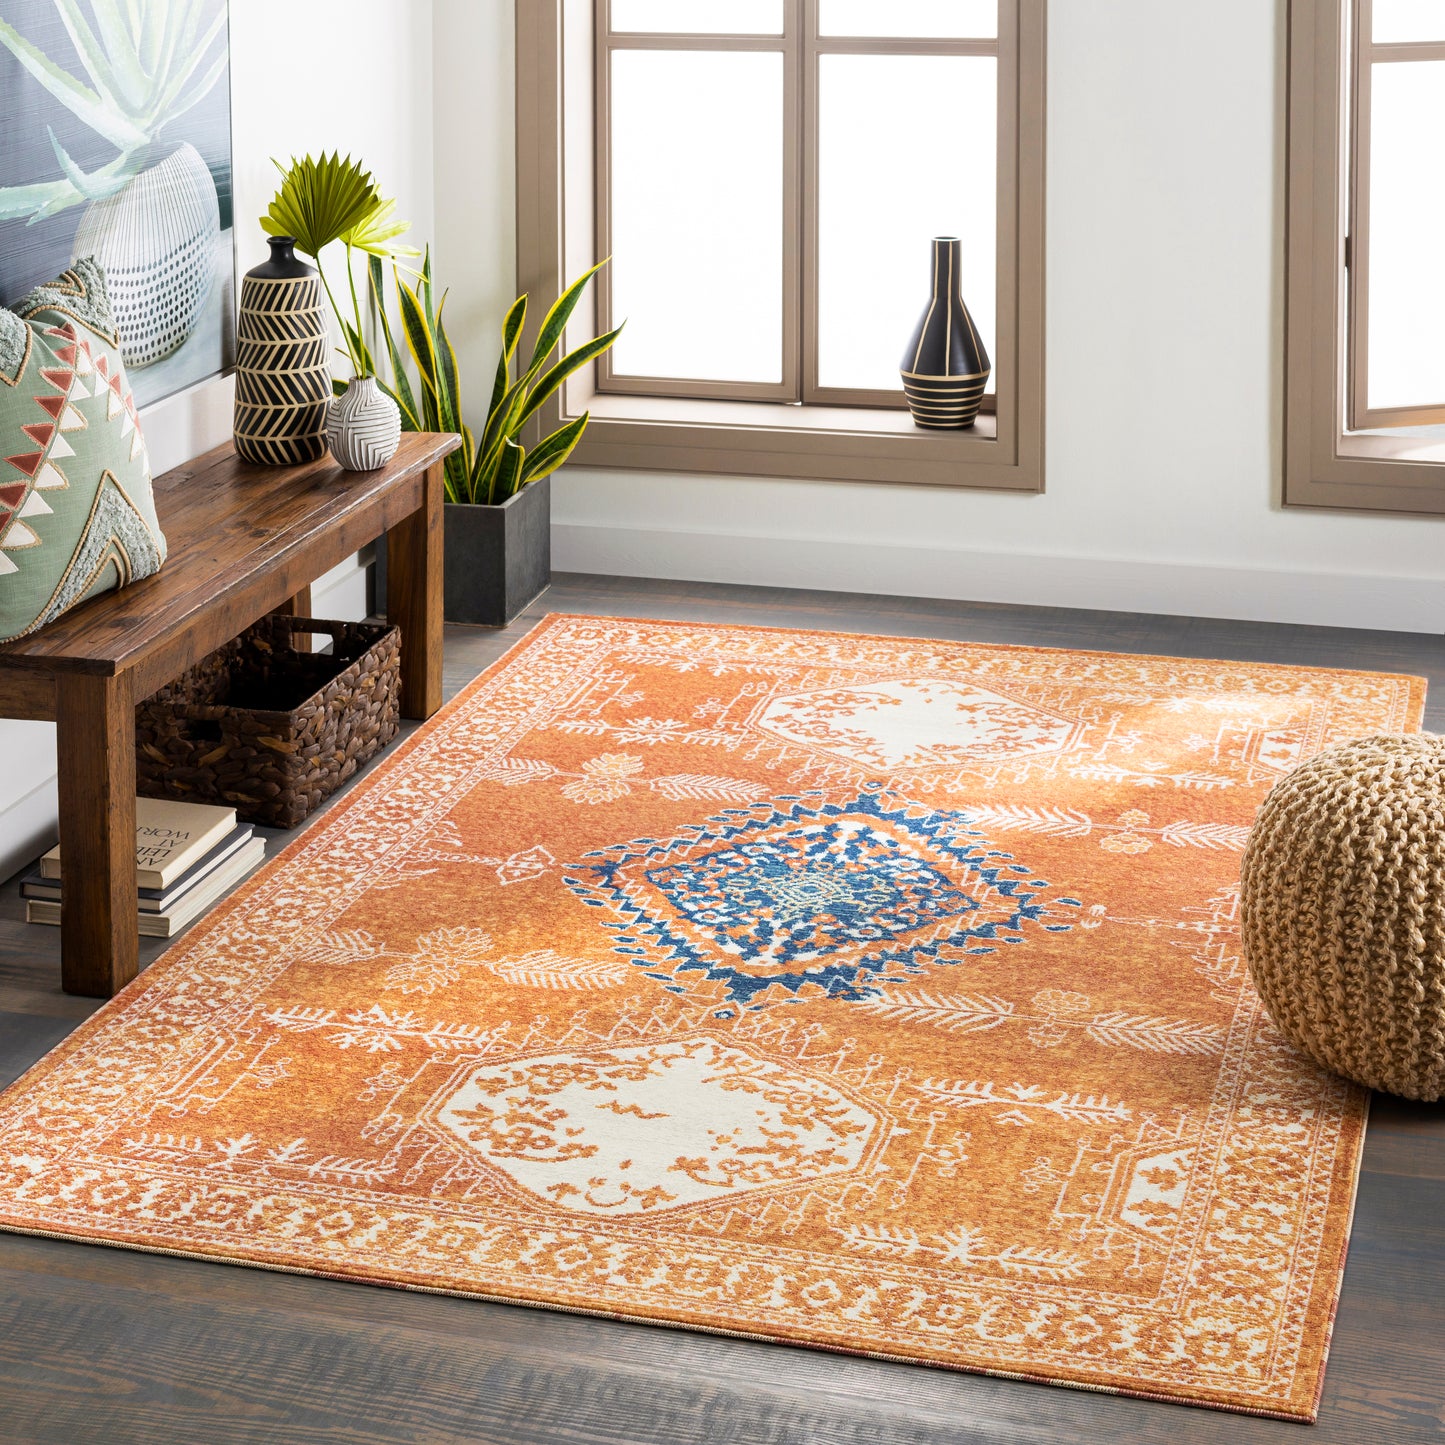 Bodrum 25674 Machine Woven Synthetic Blend Indoor/Outdoor Area Rug by Surya Rugs